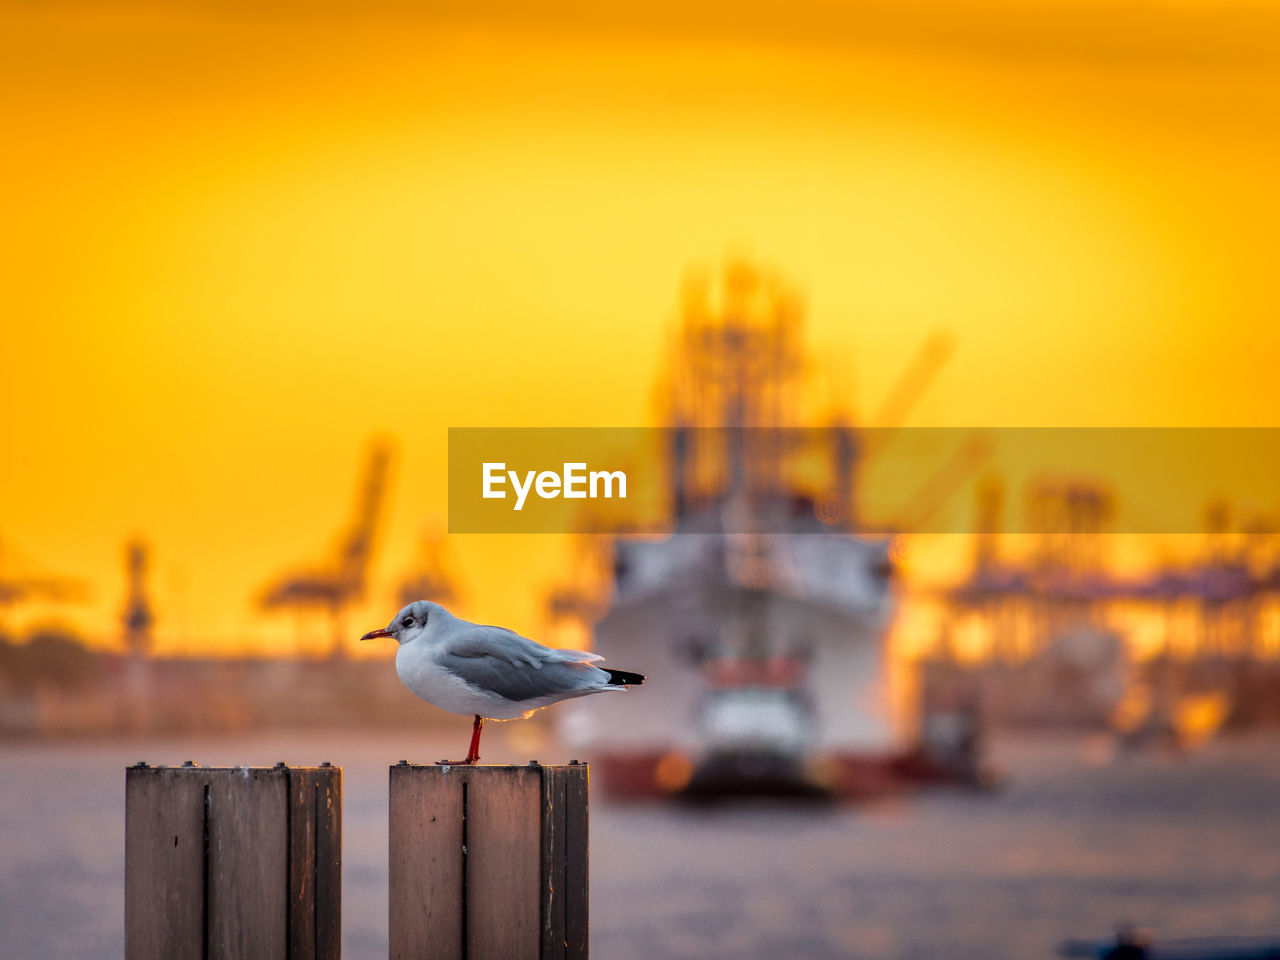 Little gull perching on wooden post by moored ship against orange sky